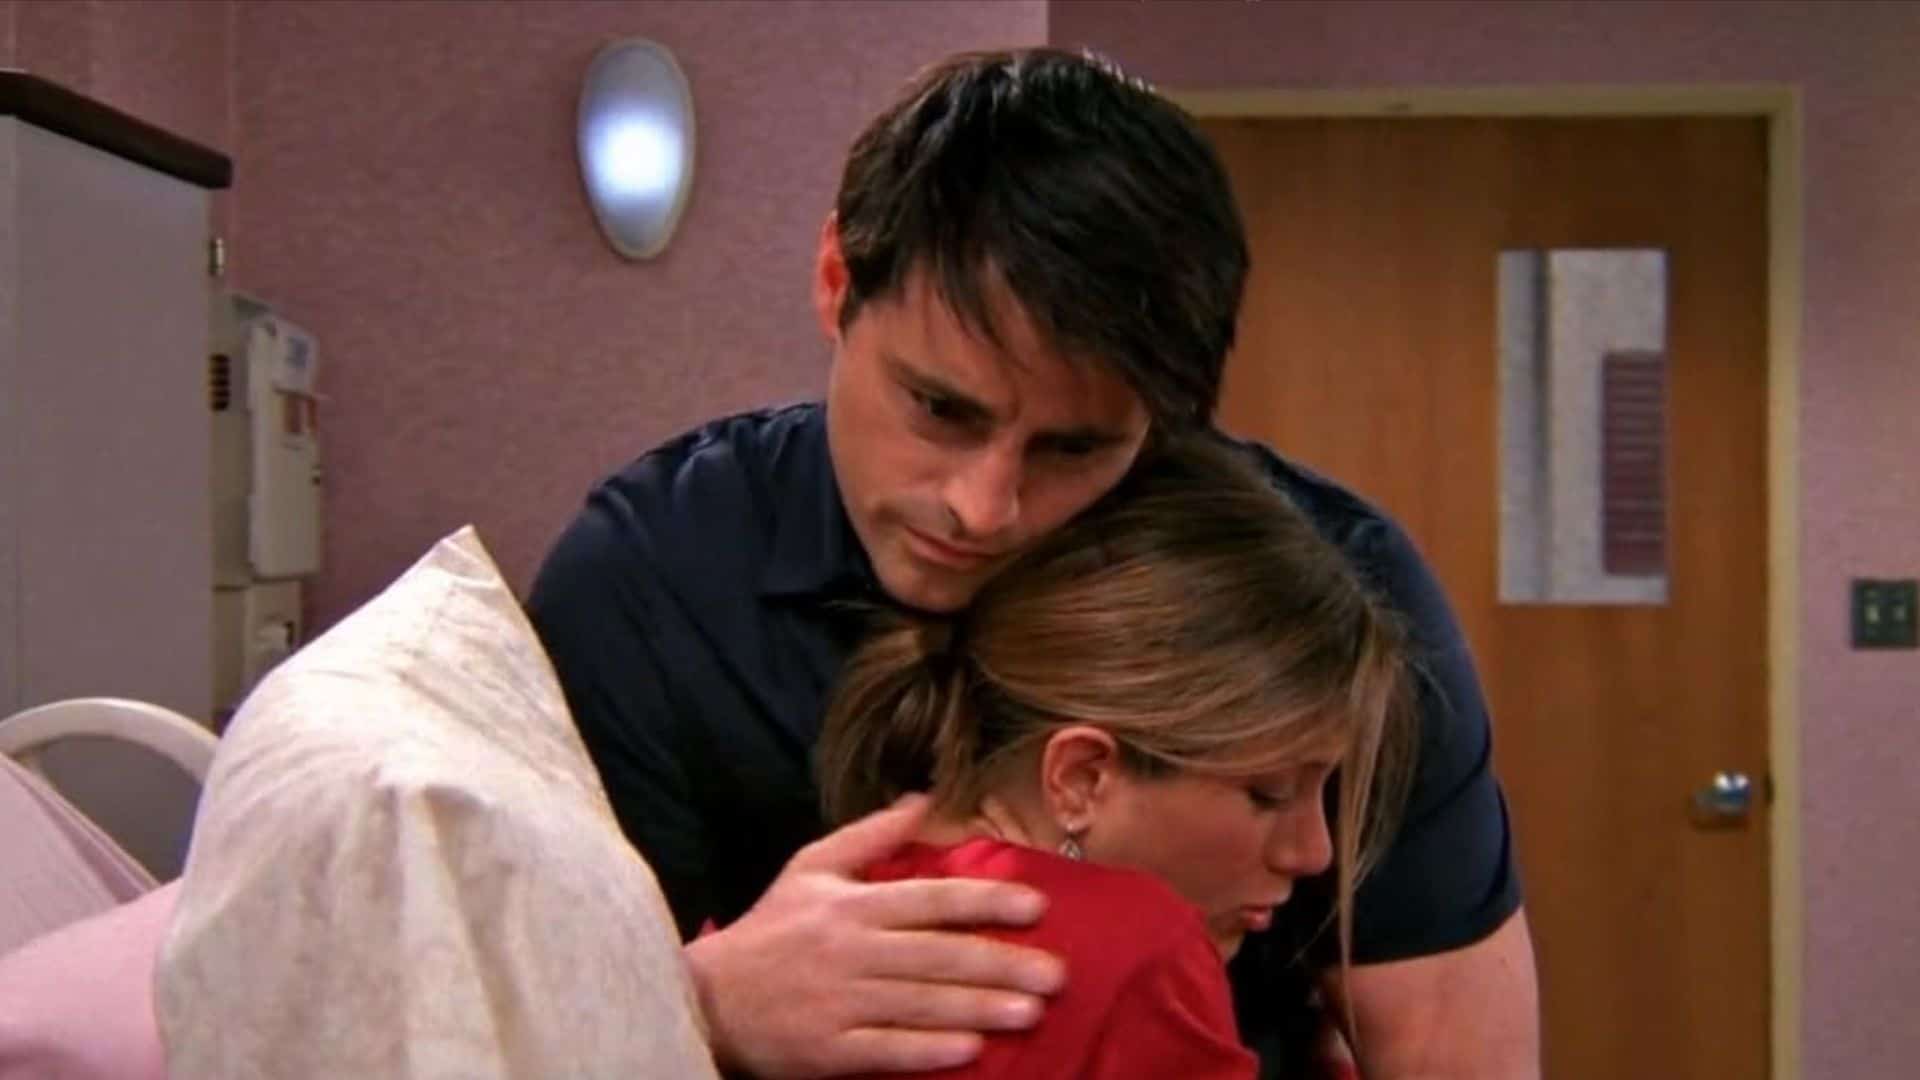 A man and a woman hug in a hospital room in this image from Warner Bros. Television.